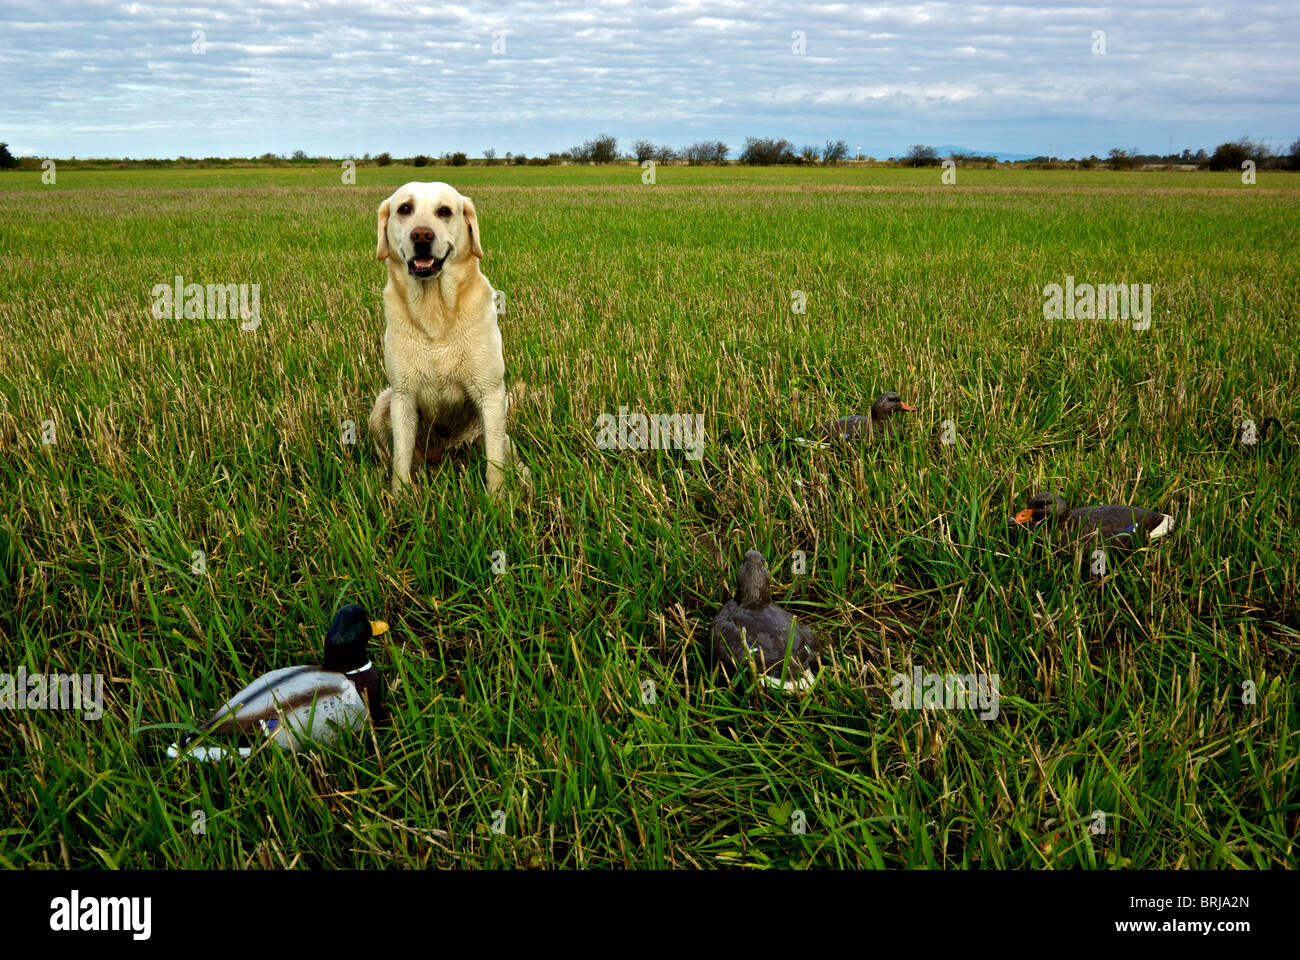 Young yellow labrador retriever hunting dog sitting beside set of mallard duck decoys in harvested barley stubble field Delta BC Stock Photo